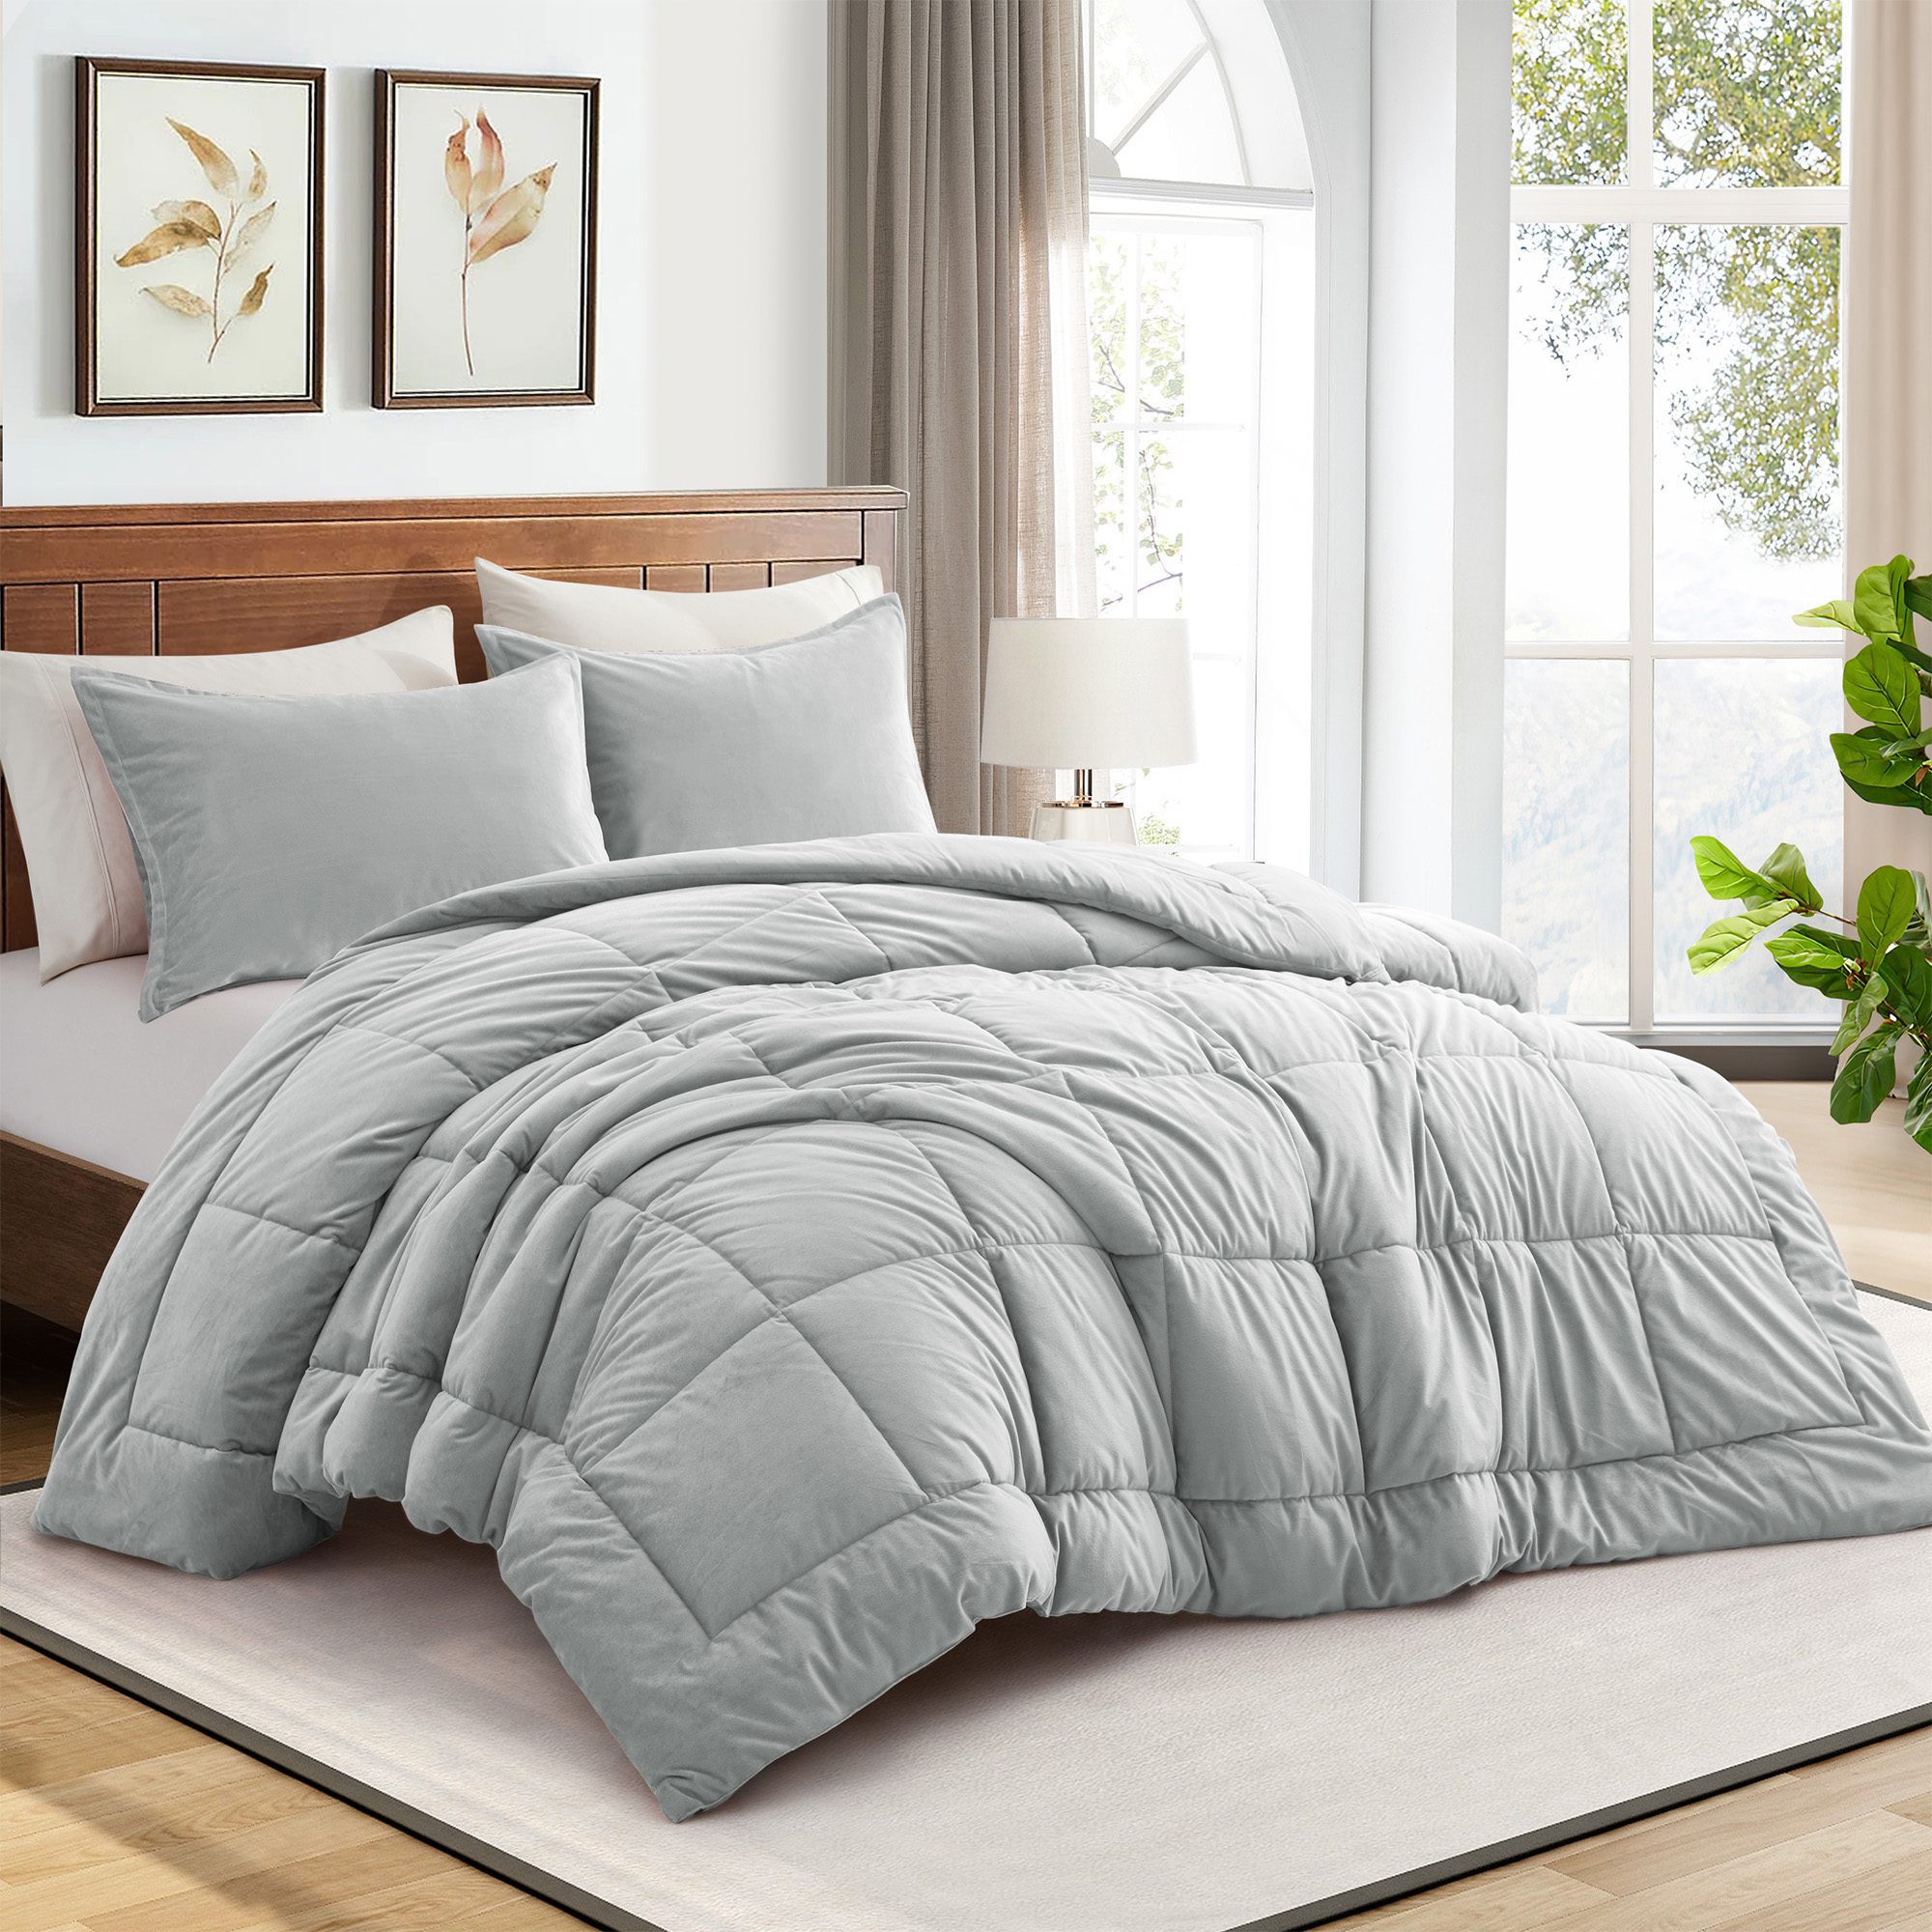 2 Or 3 Pieces Quilted Comforter All Season Down Alternative Reversible Ultra Soft Velet Duvet Insert - Full/Queen Size